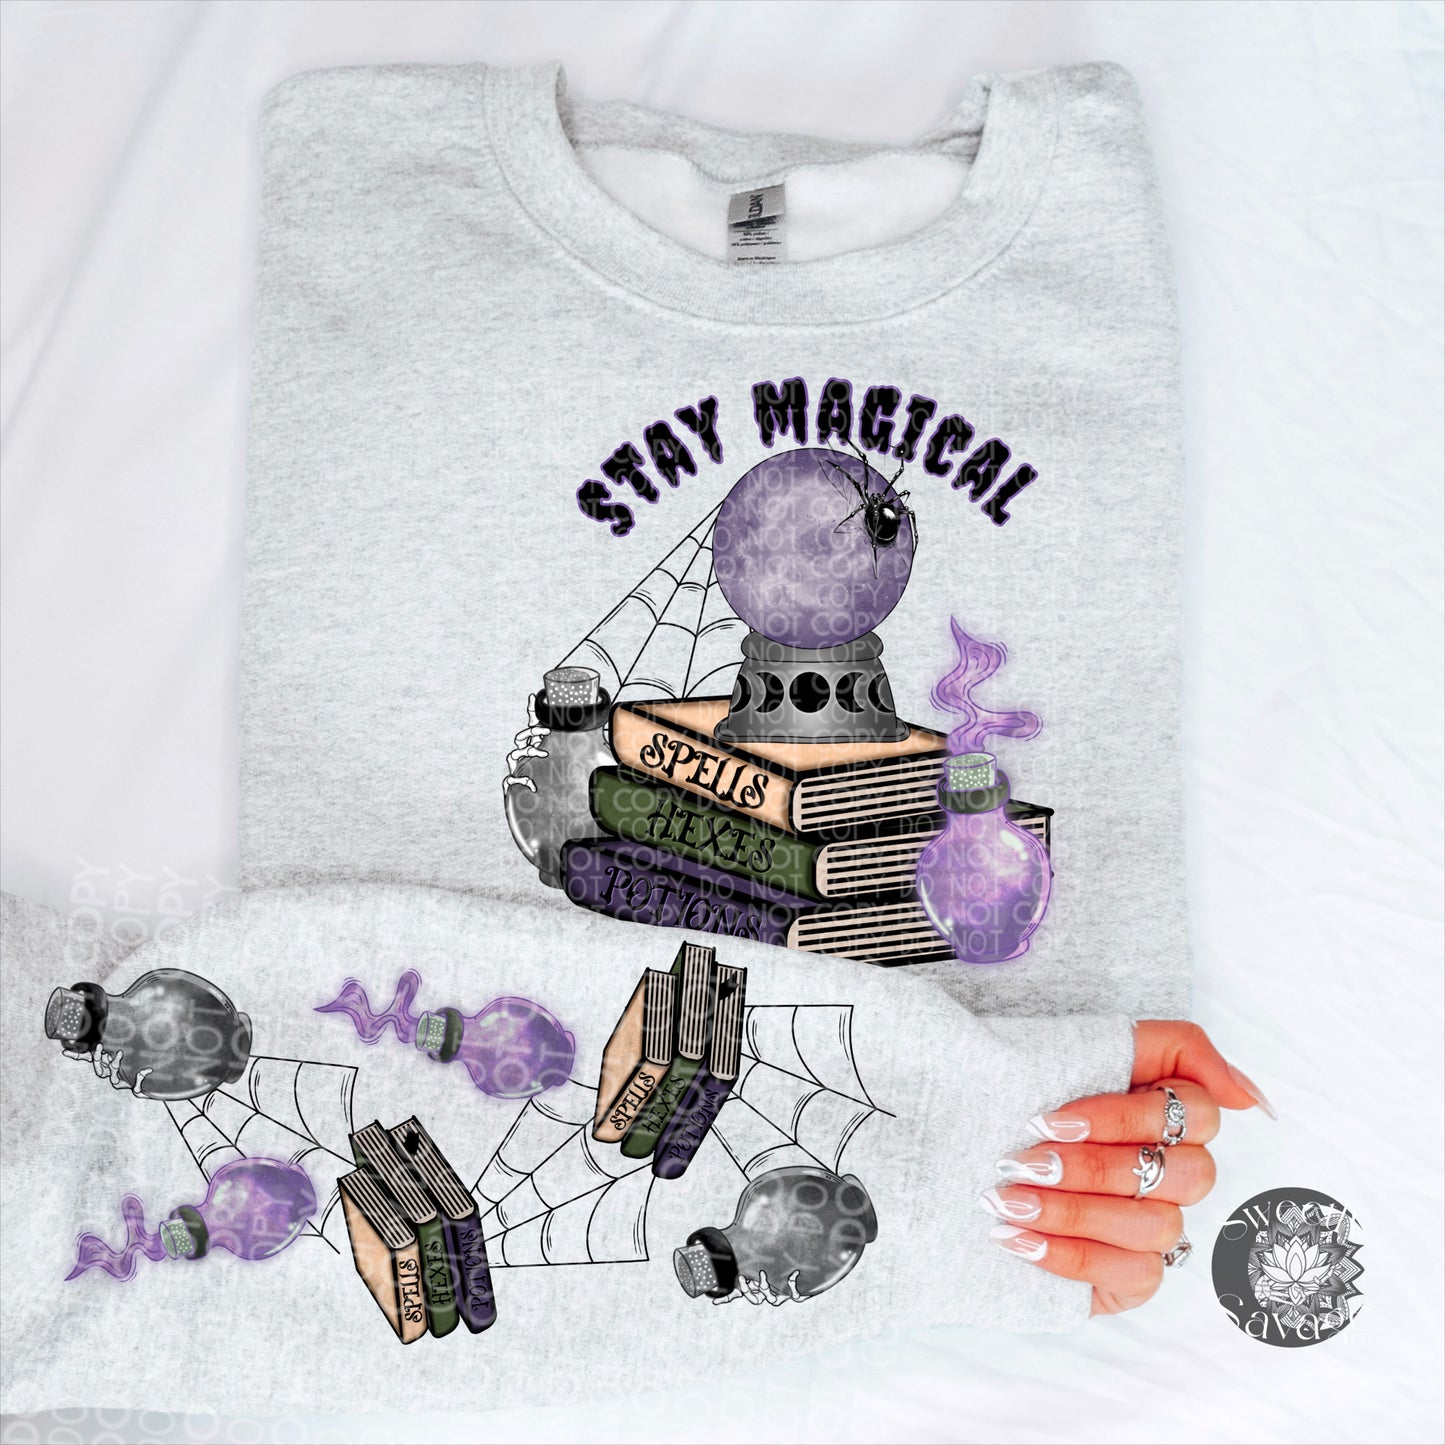 Stay Magical with sleeve Png File